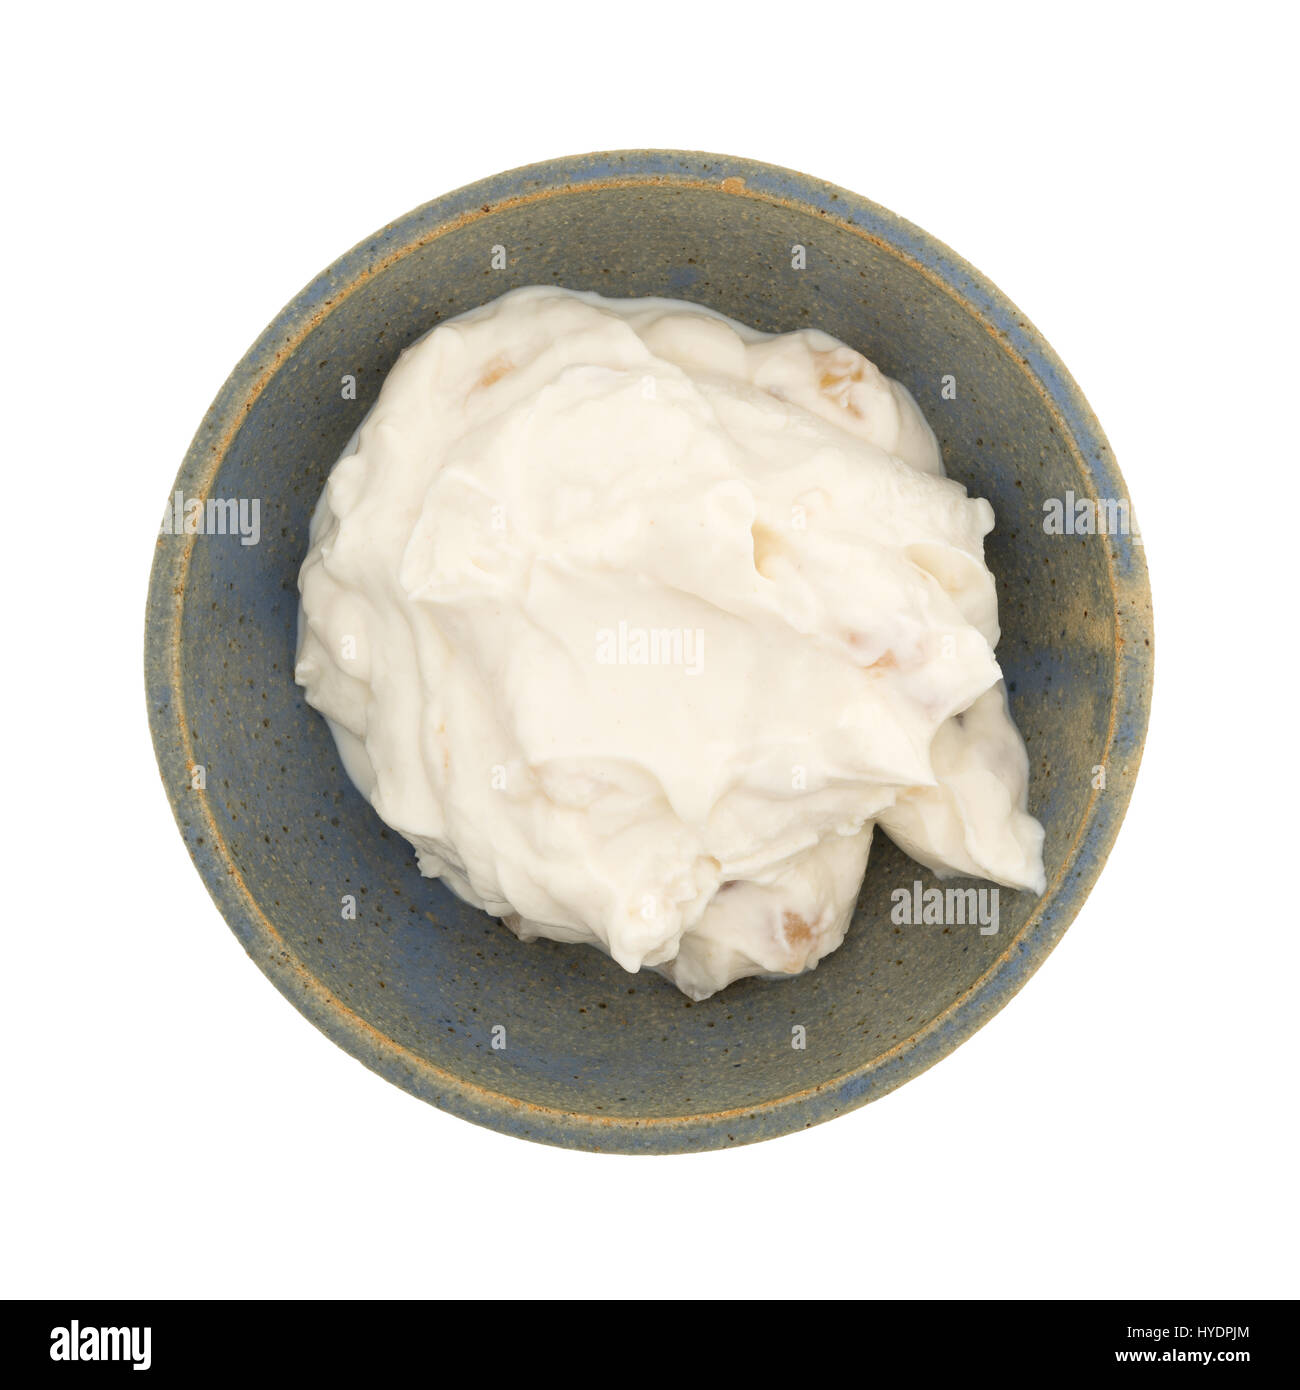 Top view of a serving of apple vanilla Greek yogurt in an old stoneware bowl isolated on a white background. Stock Photo